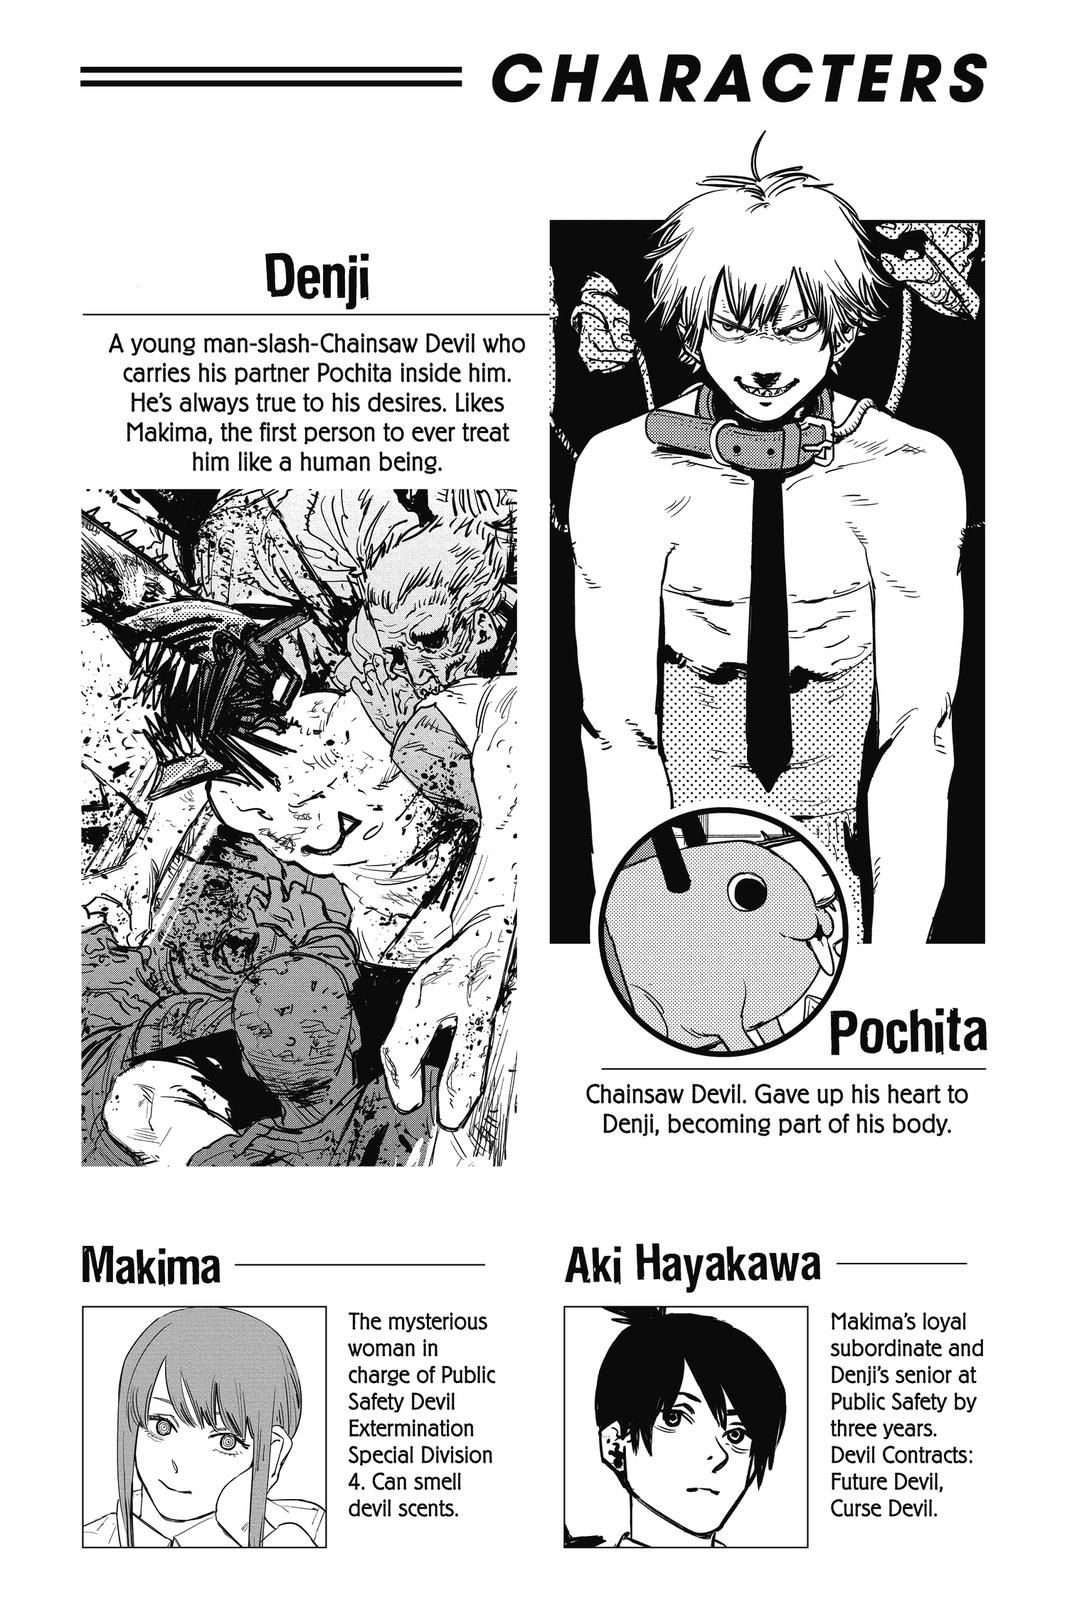 Chainsaw Man Chapter 53 Marks New Beginnings - Your Manga Week #13